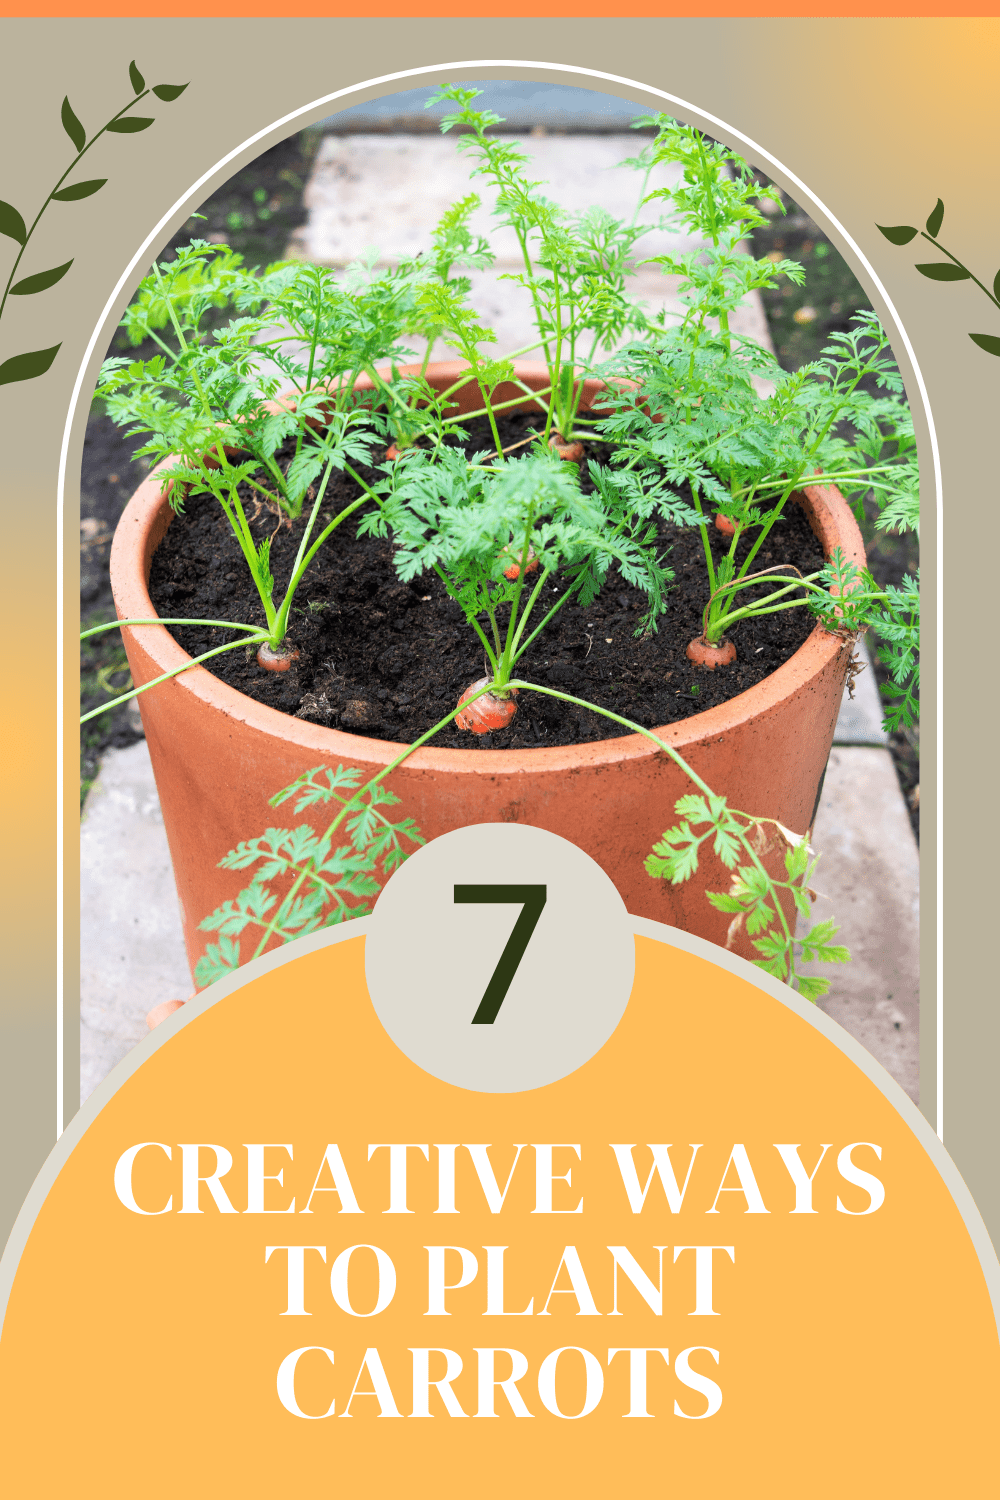 Learn creative ways to plant carrots! From using containers to grow bags, pallets, and more- explore these methods for those with limited garden space or who want to add visual interest to their garden. via @mystayathome